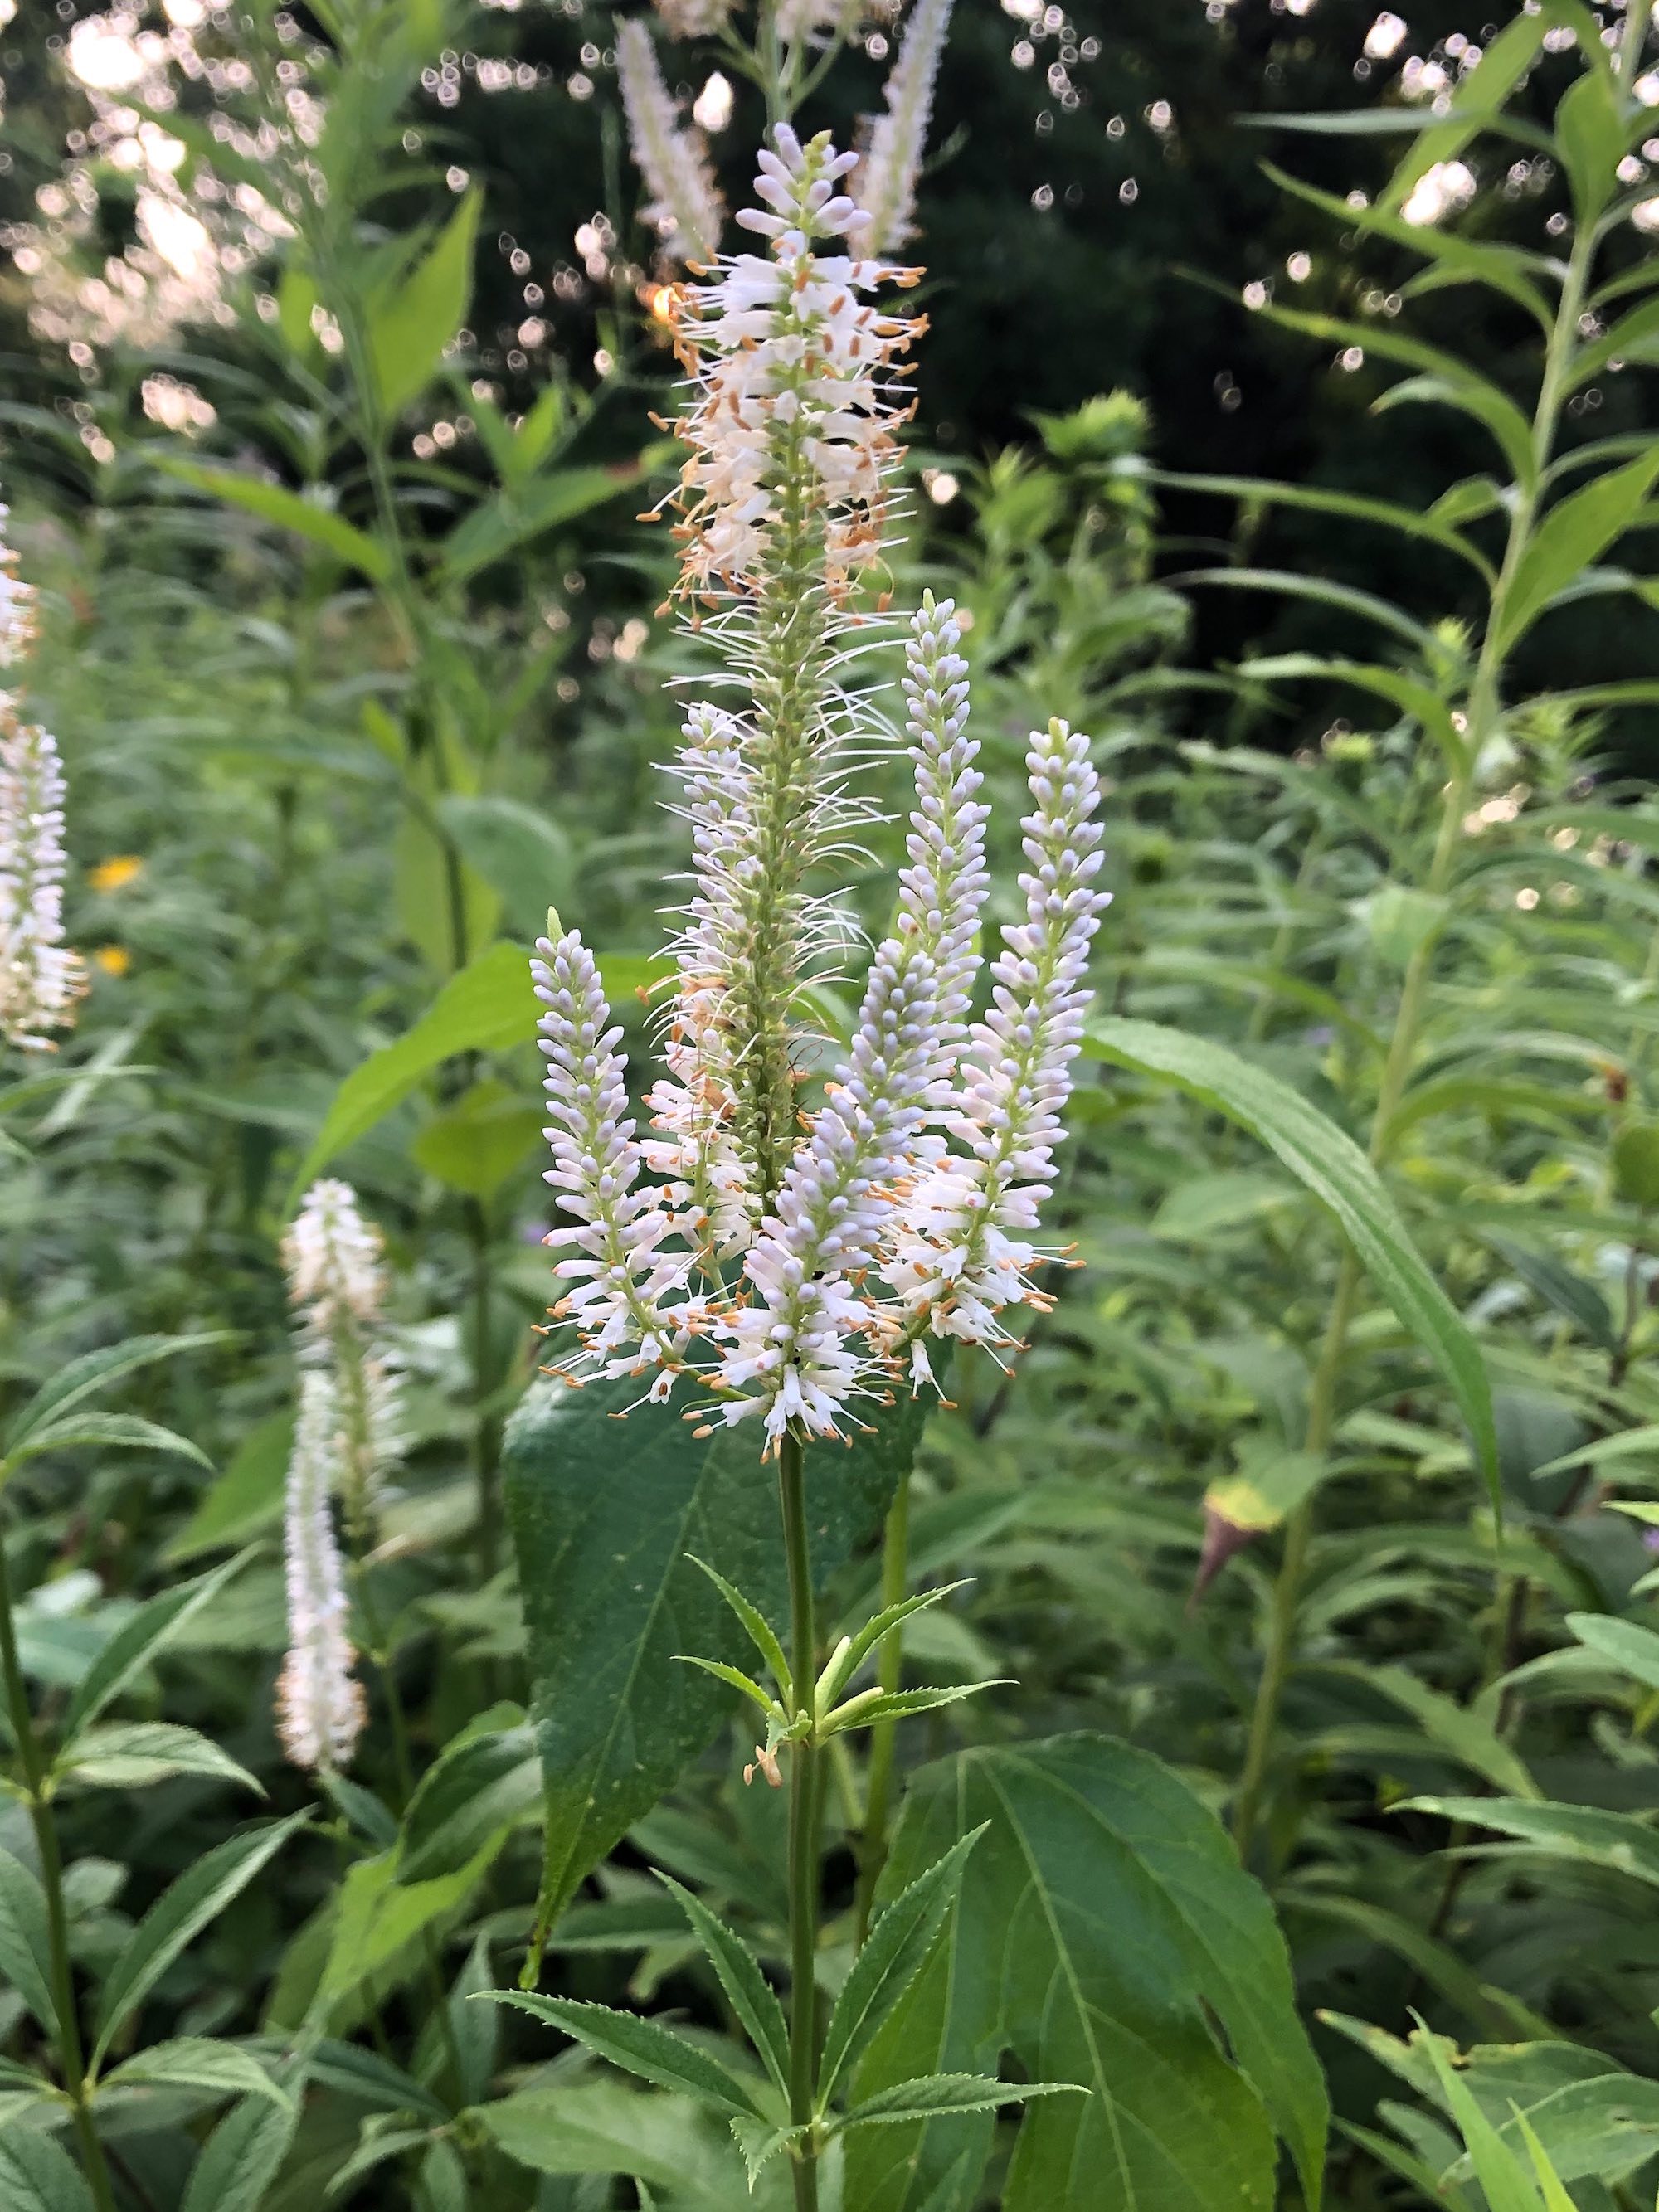 Culver's Root in Oak Savanna in Madison, Wisconsin on July 24, 2019.